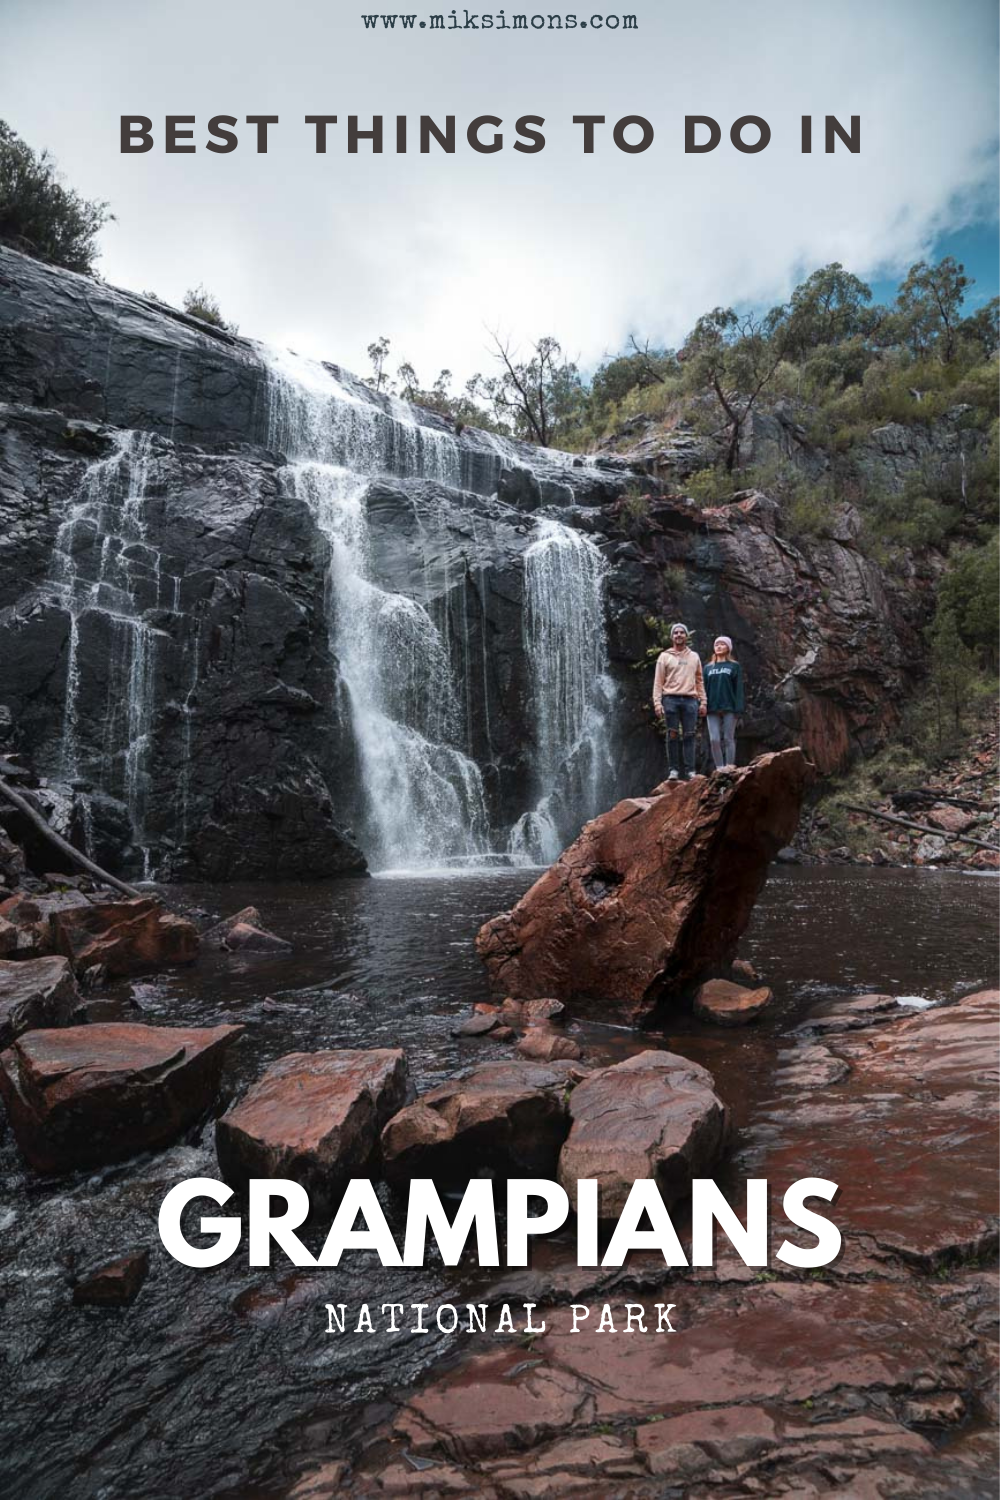 Things to do in the Grampians